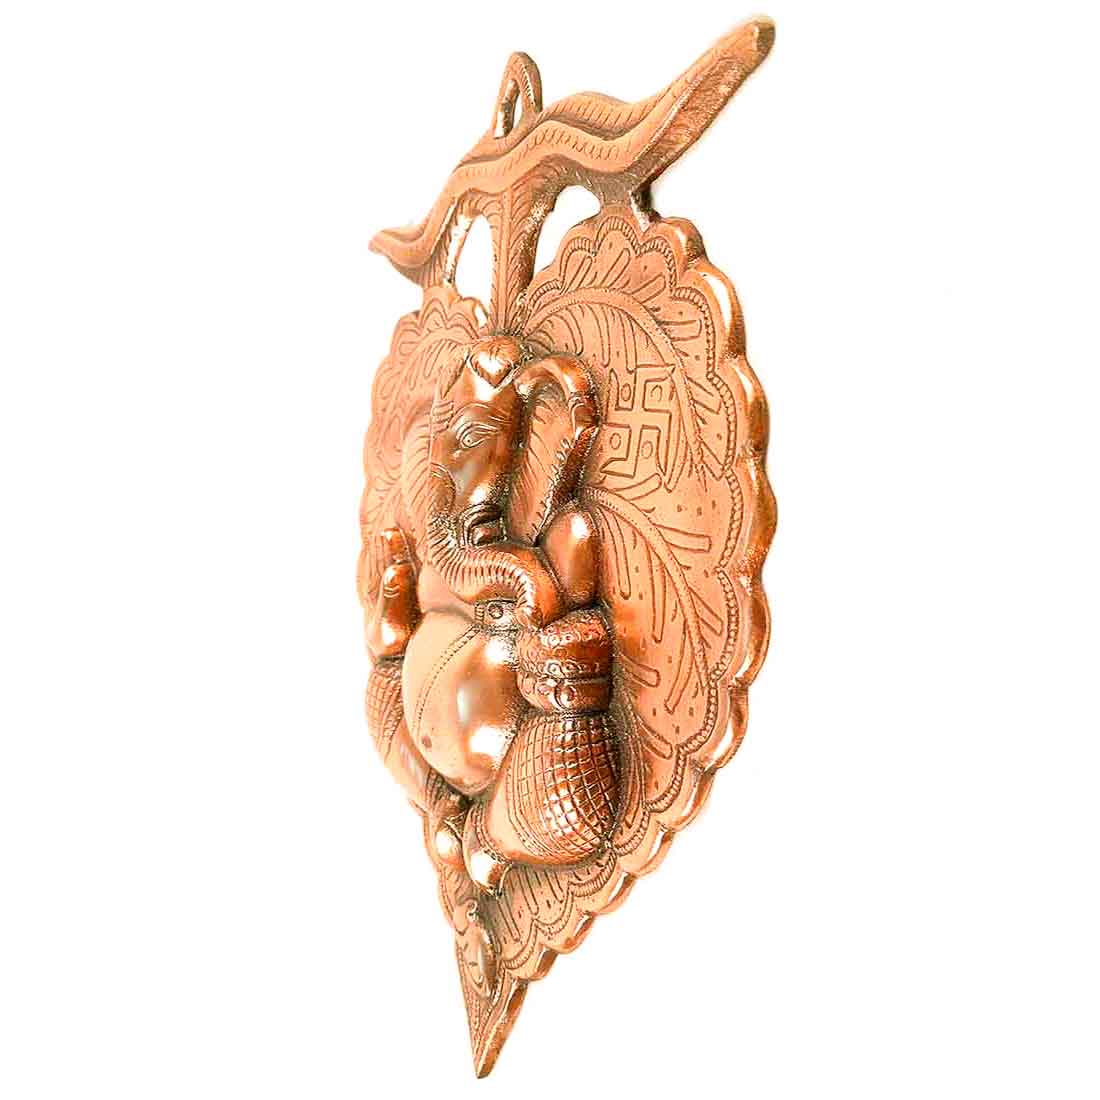 Ganesh Idol Wall Hanging | Lord Ganesha With Leaf Design Wall Statue Decor |Religoius & Spiritual Wall Art - For Puja, Home & Entrance  Living Room & Gift - 13 Inch